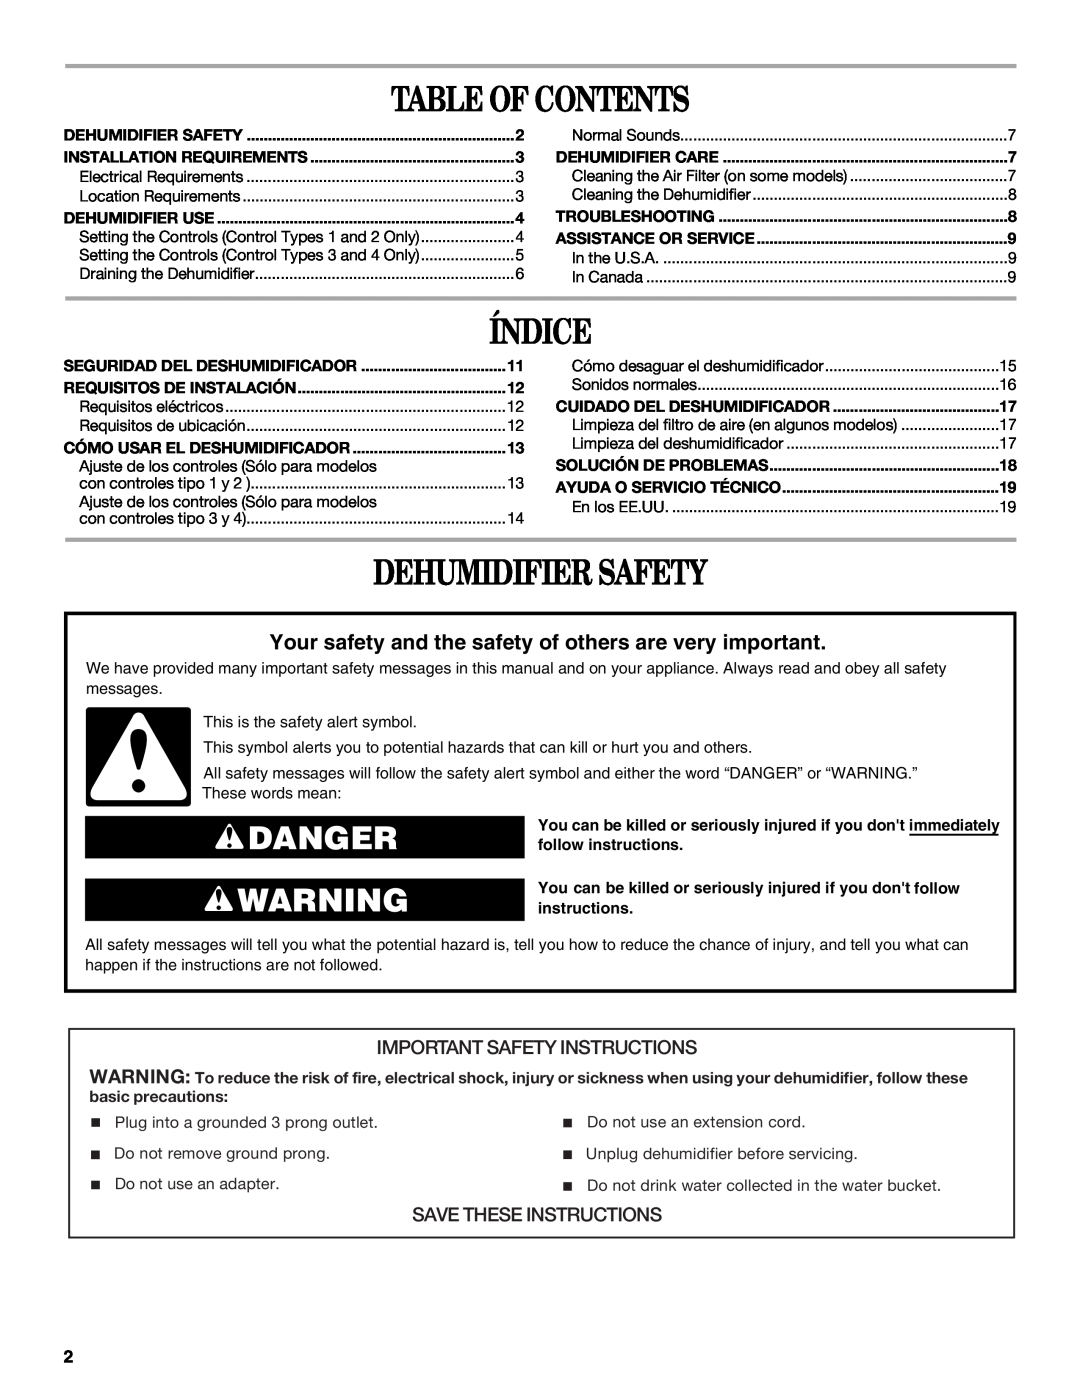 Whirlpool AD35DSS1 manual Table Of Contents, Índice, Dehumidifier Safety, Danger, Important Safety Instructions 